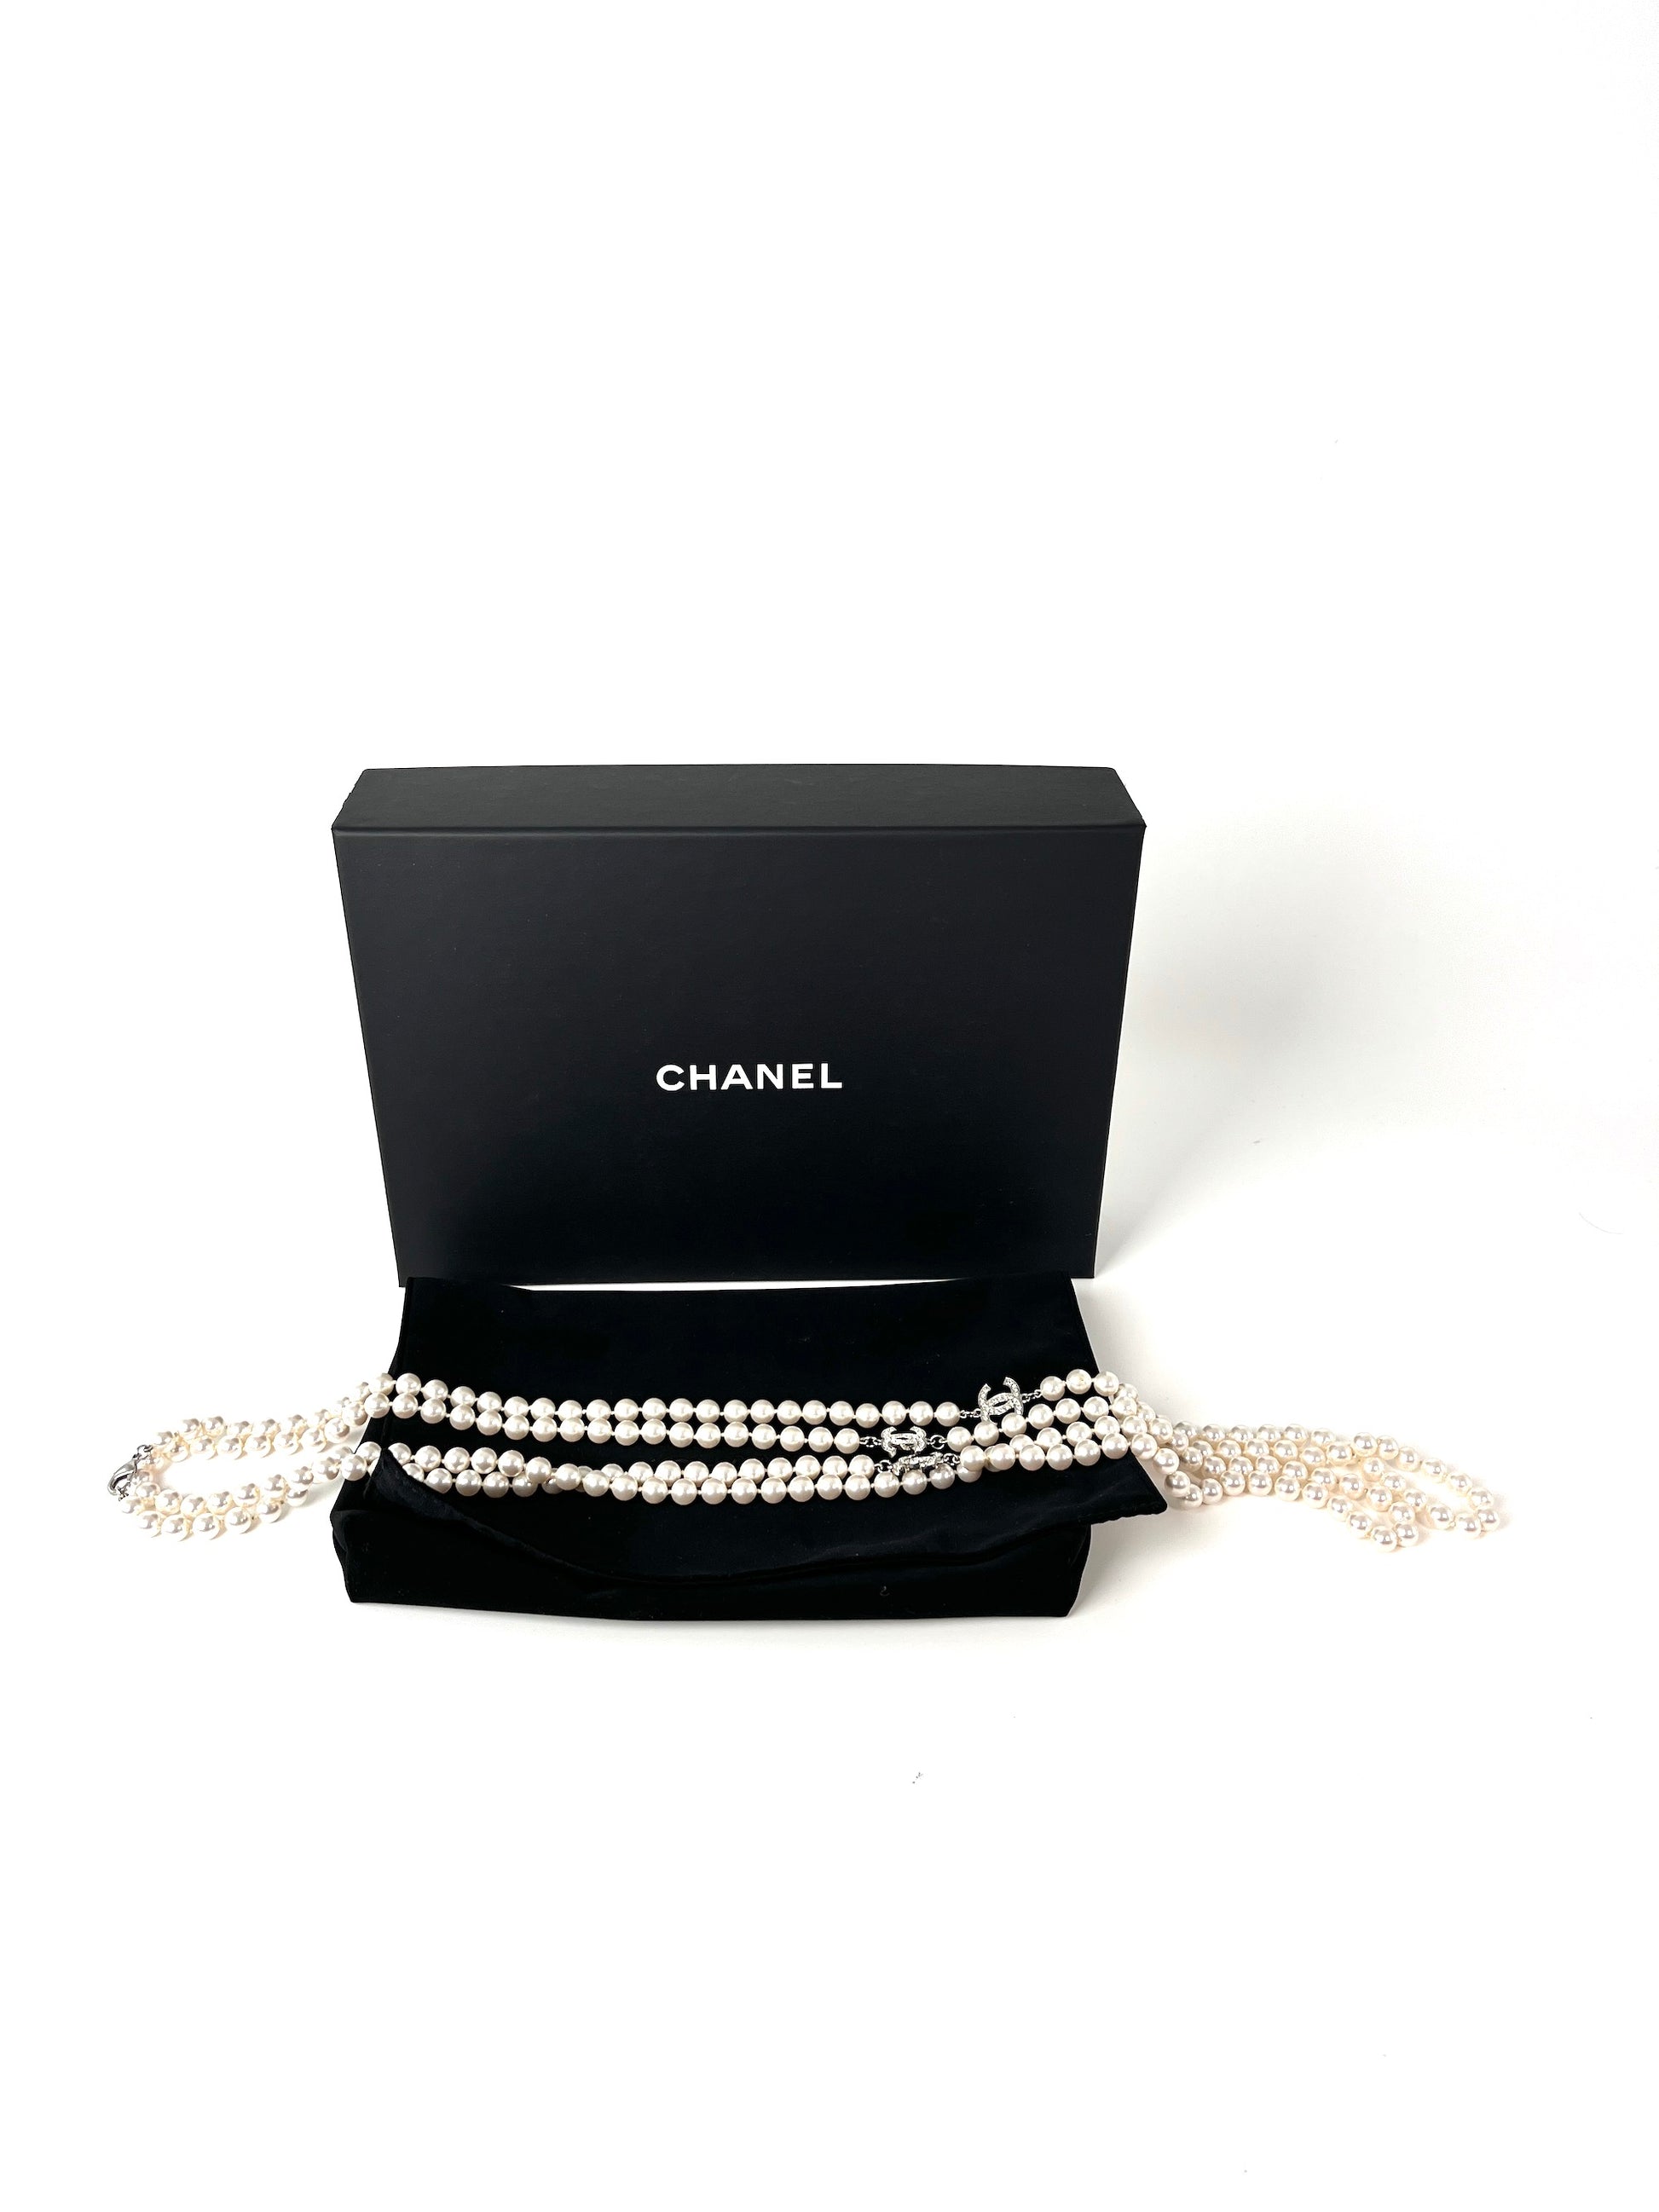 CHANEL CC Faux Pearl Rhinestone Beaded Station Long Double Necklace